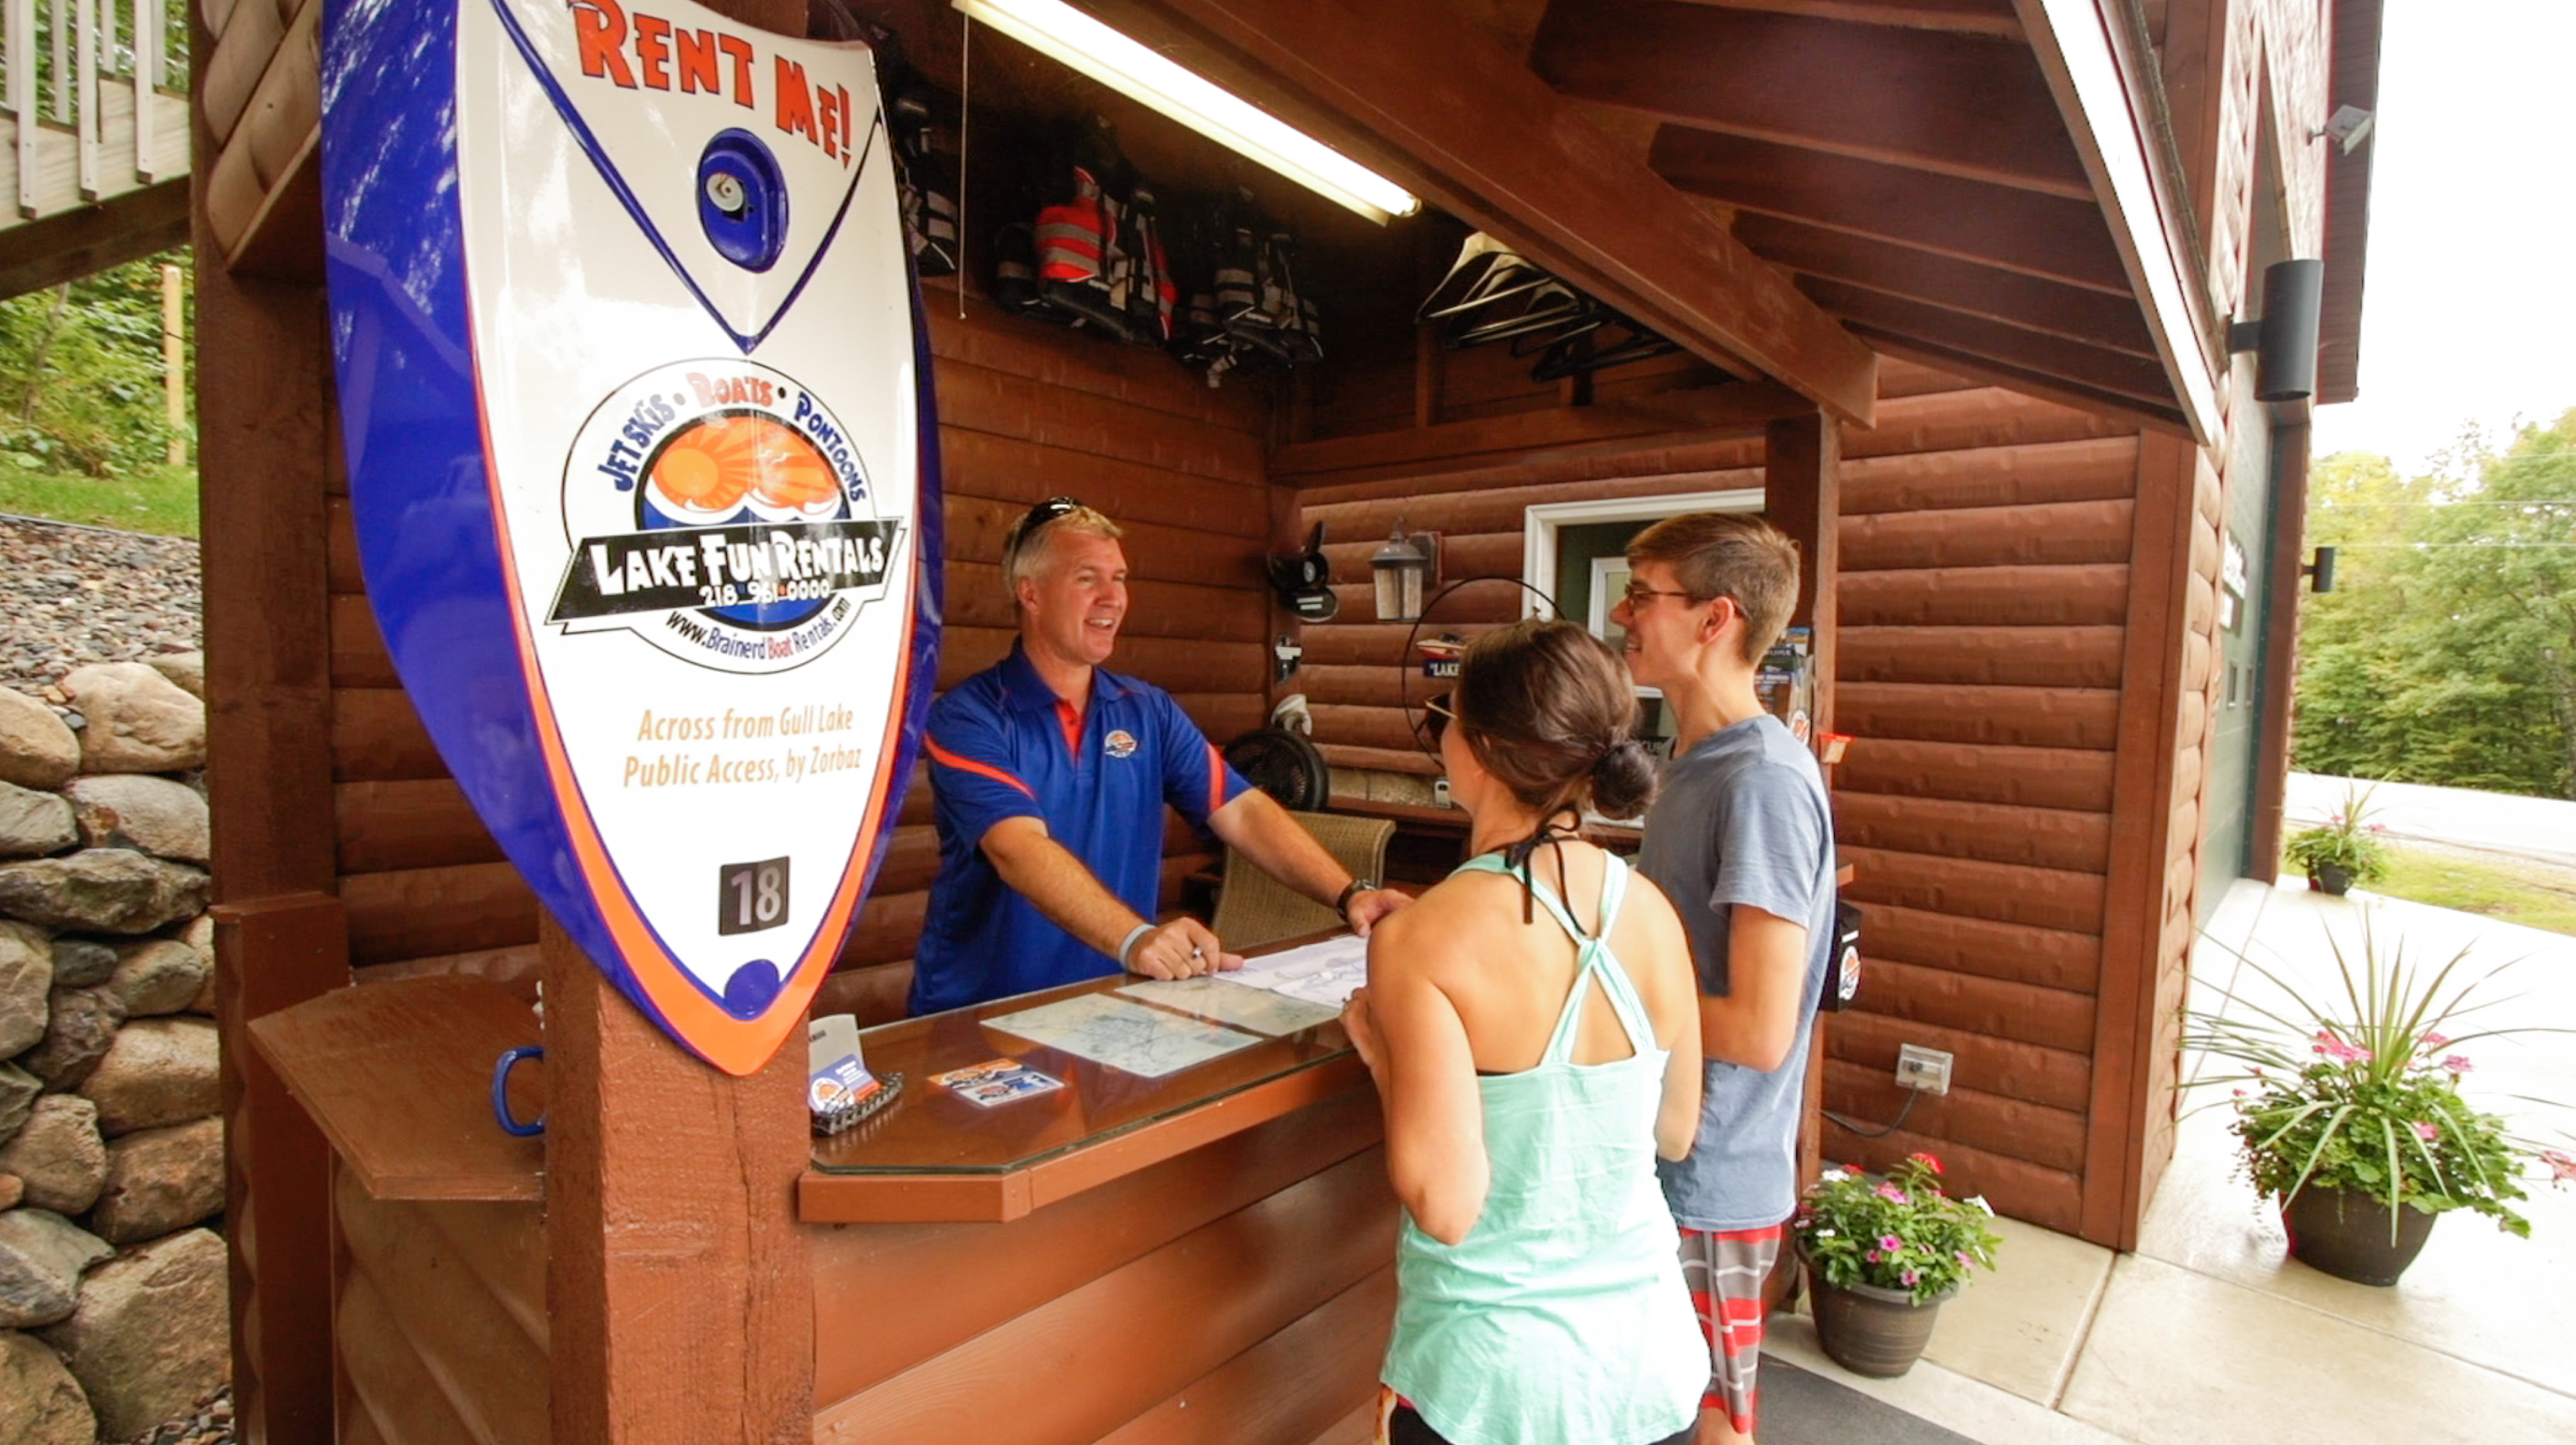 A young man and woman standing in front of a Lake Fun Rentals desk while an employee helps them rent something.